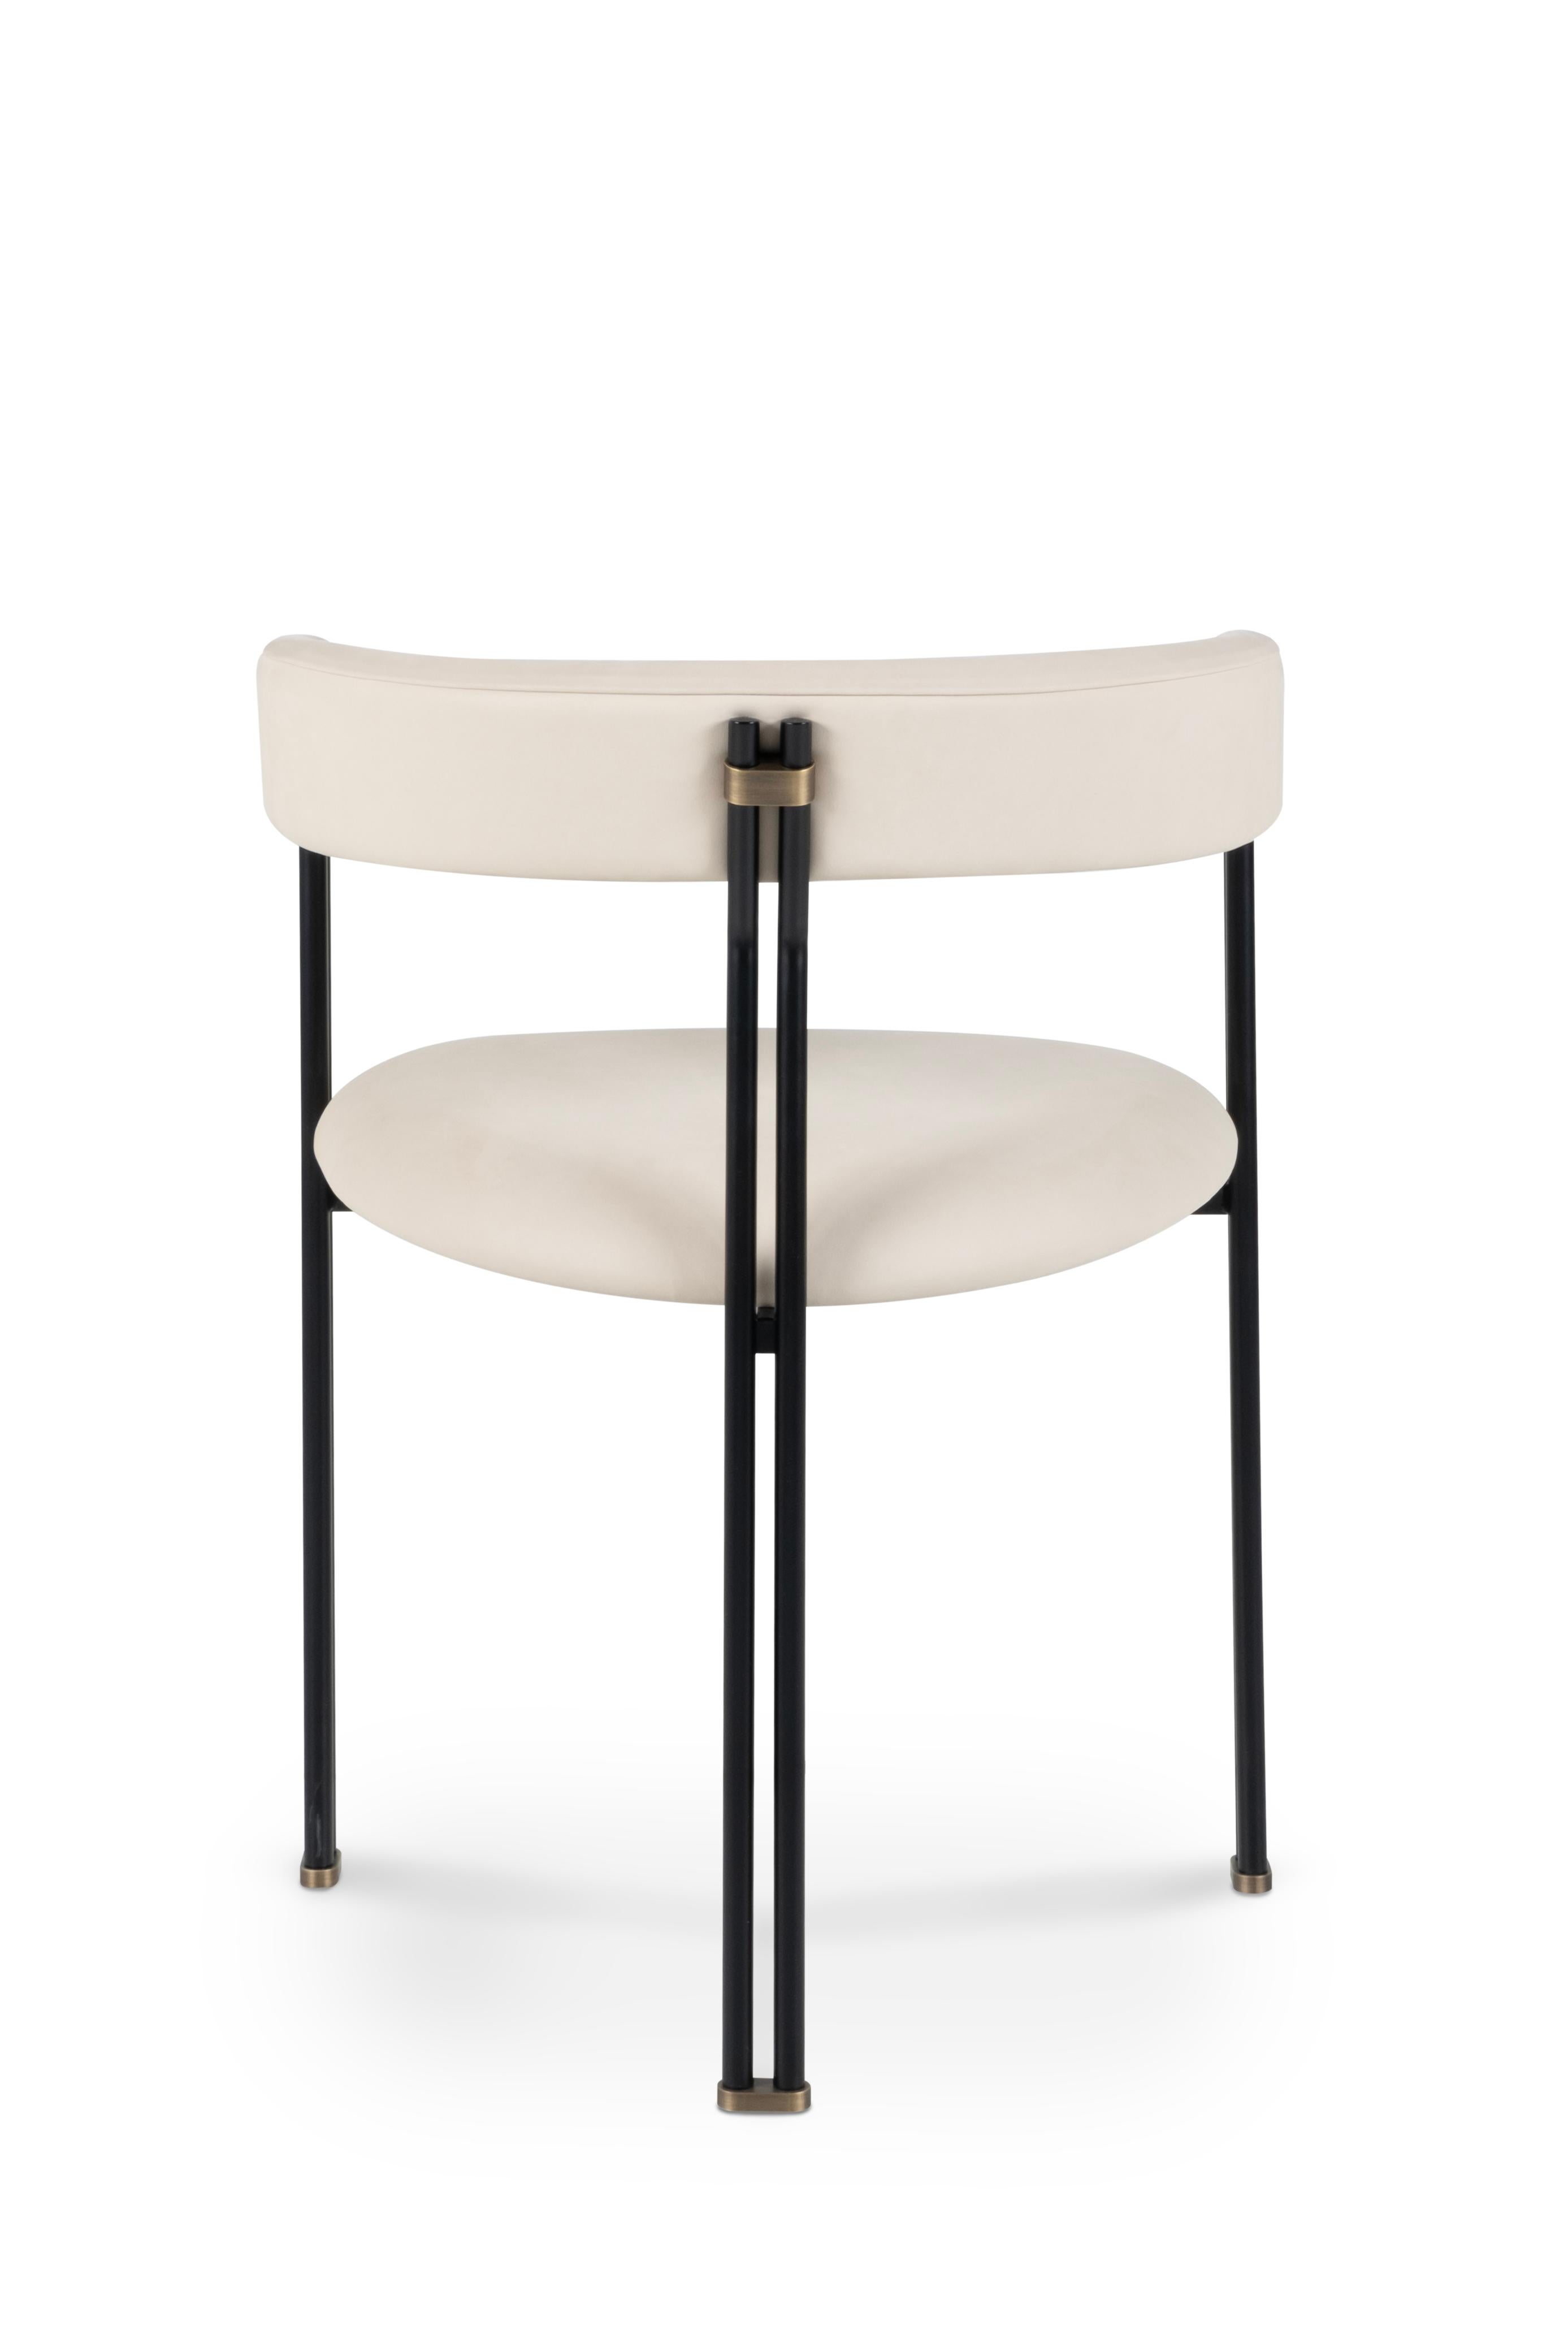 Modern Maia Dining Chair, Beige Italian Leather, Handmade Portugal by Greenapple For Sale 5